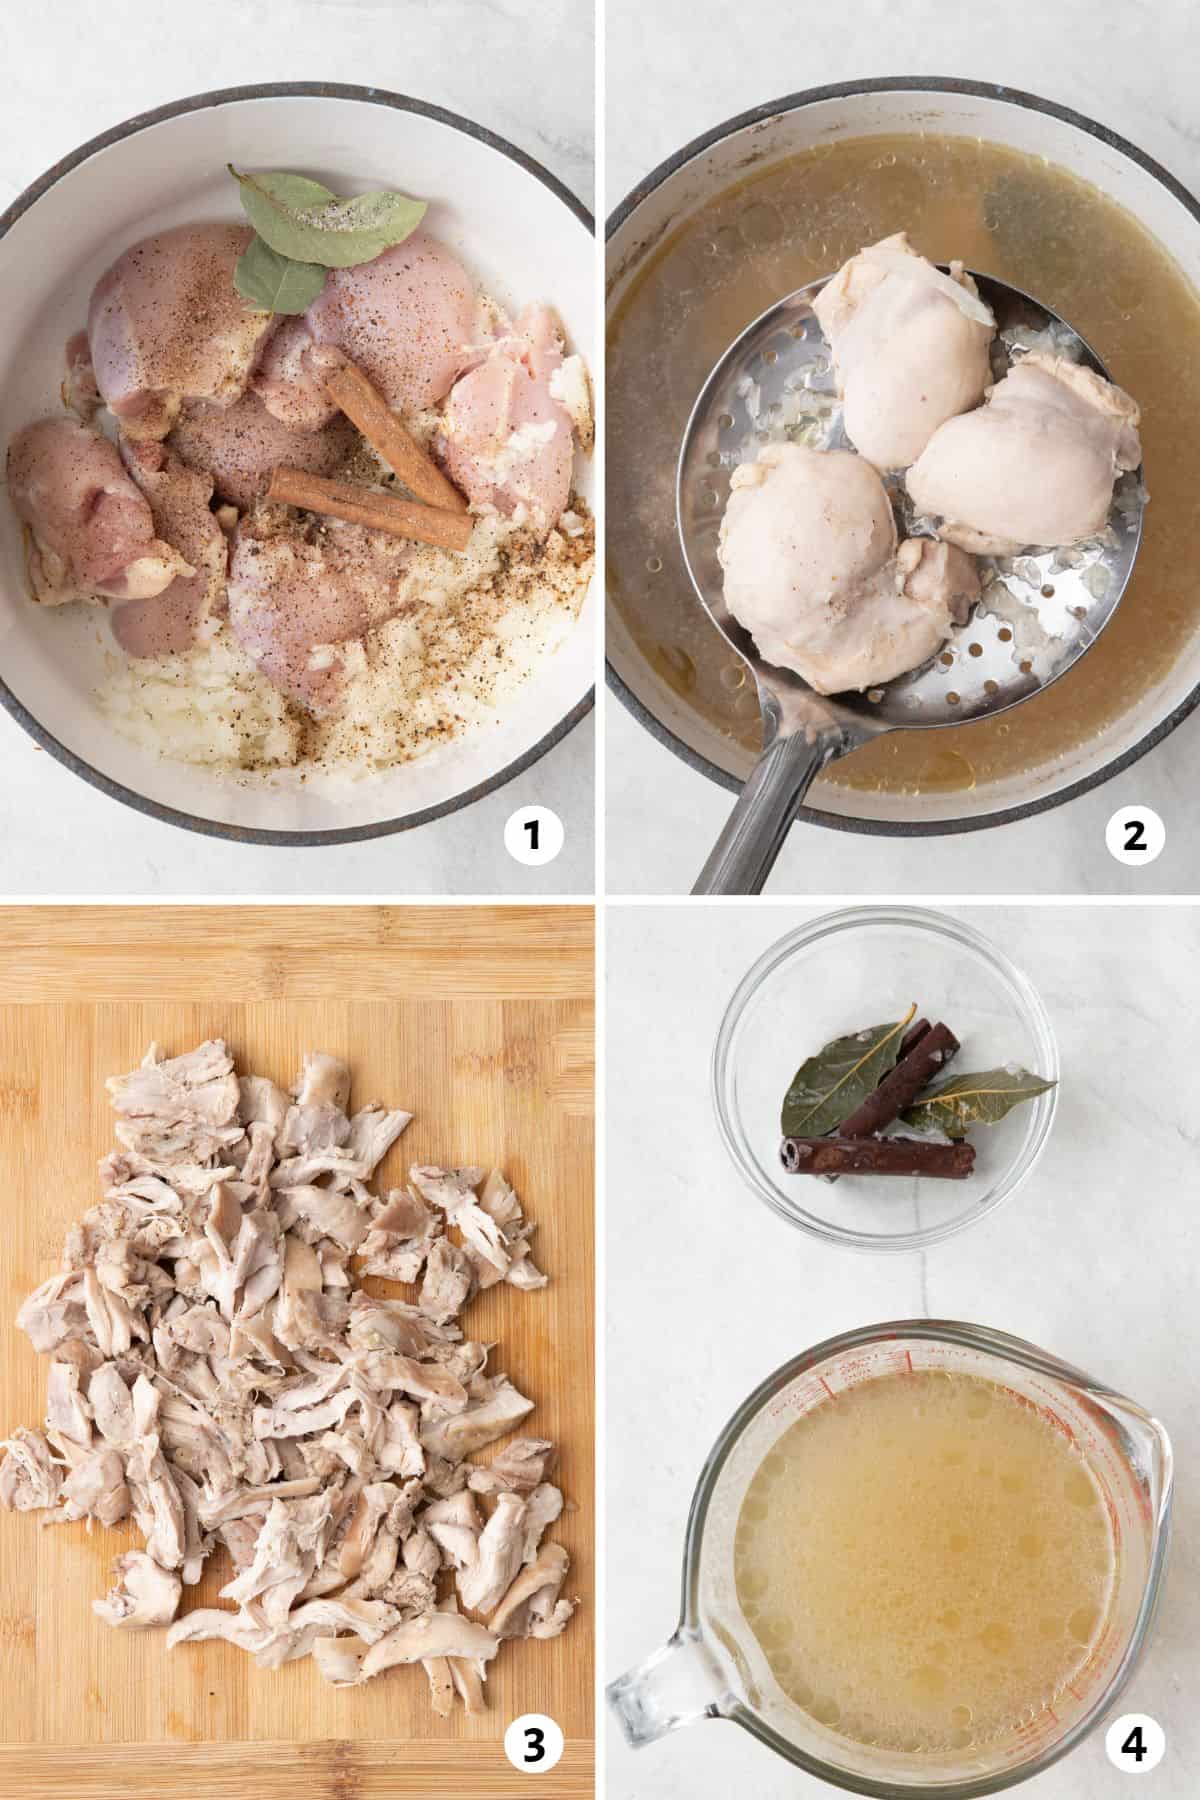 4 image collage making part of the recipe: 1- chicken and spices in a pot, 2- large slotted spoon removing cooked chicken, 3- chicken shredded on a cutting board, 4- measuring cup of broth with a small dish of aromatics removed.